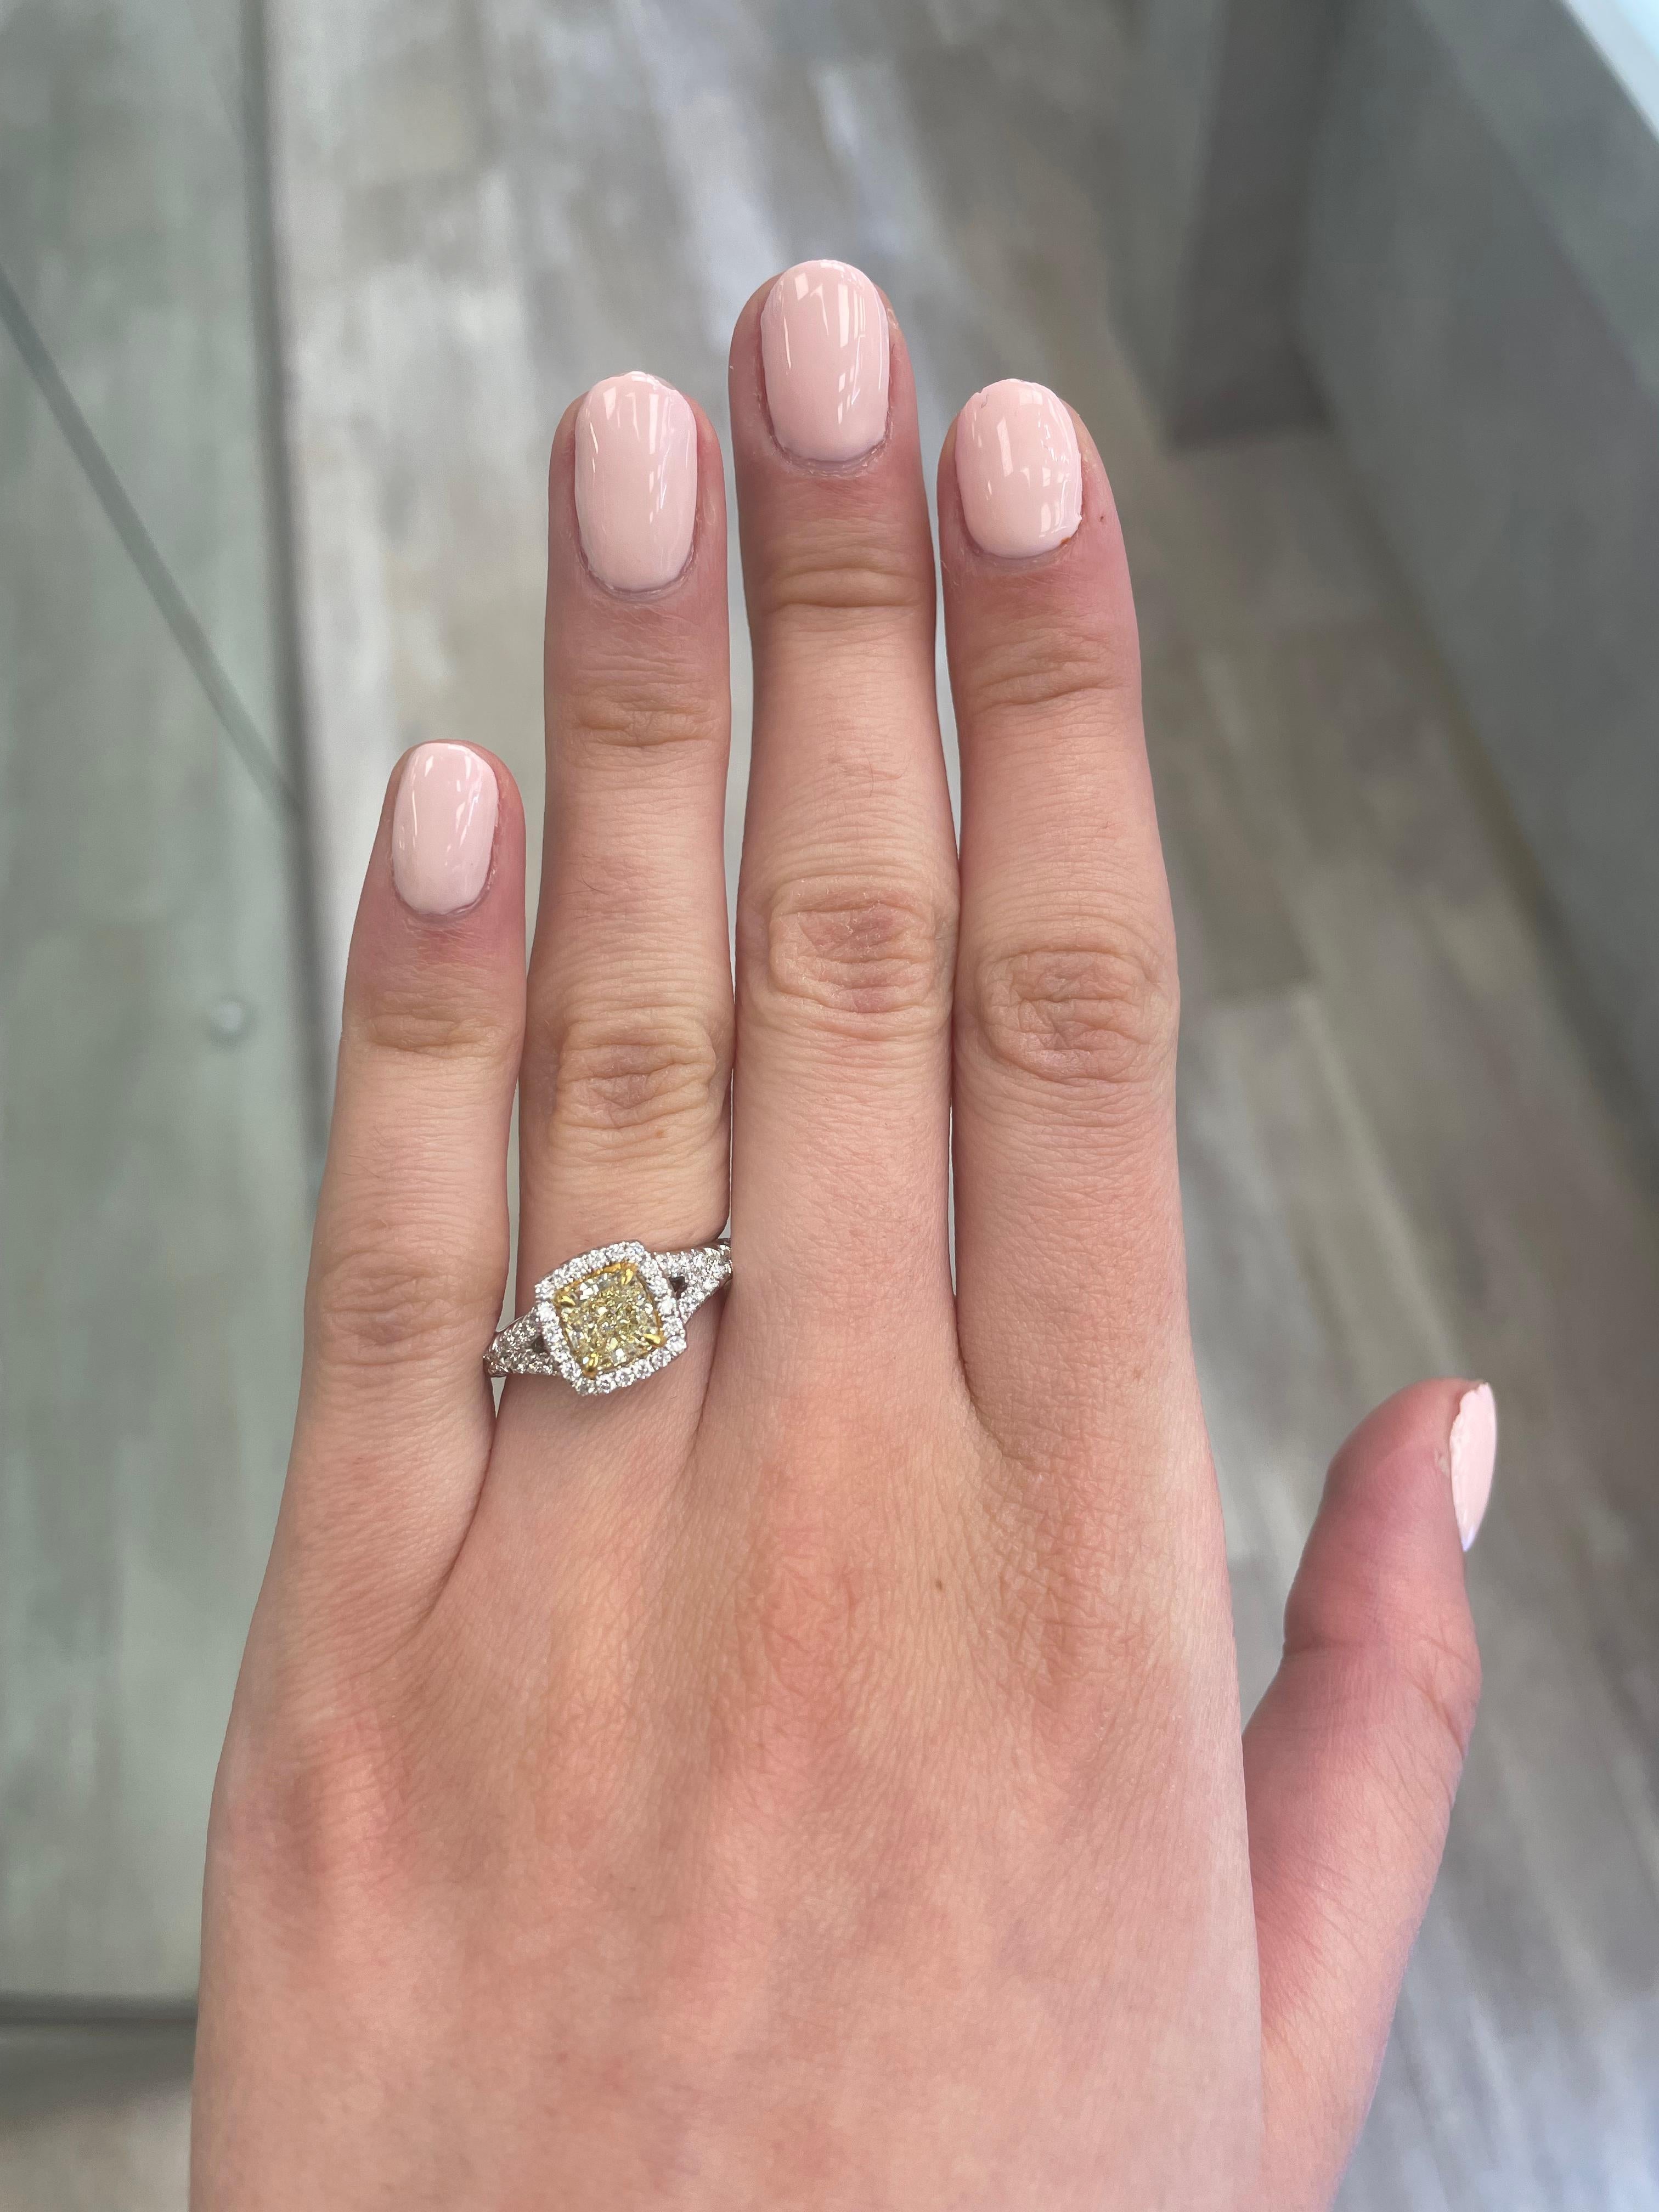 Stunning modern EGL certified yellow diamond with halo ring, two-tone 18k yellow and white gold, split shank. By Alexander Beverly Hills
1.76 carats total diamond weight.
1.23 carat cushion cut Fancy Yellow color and VVS2 clarity diamond, EGL